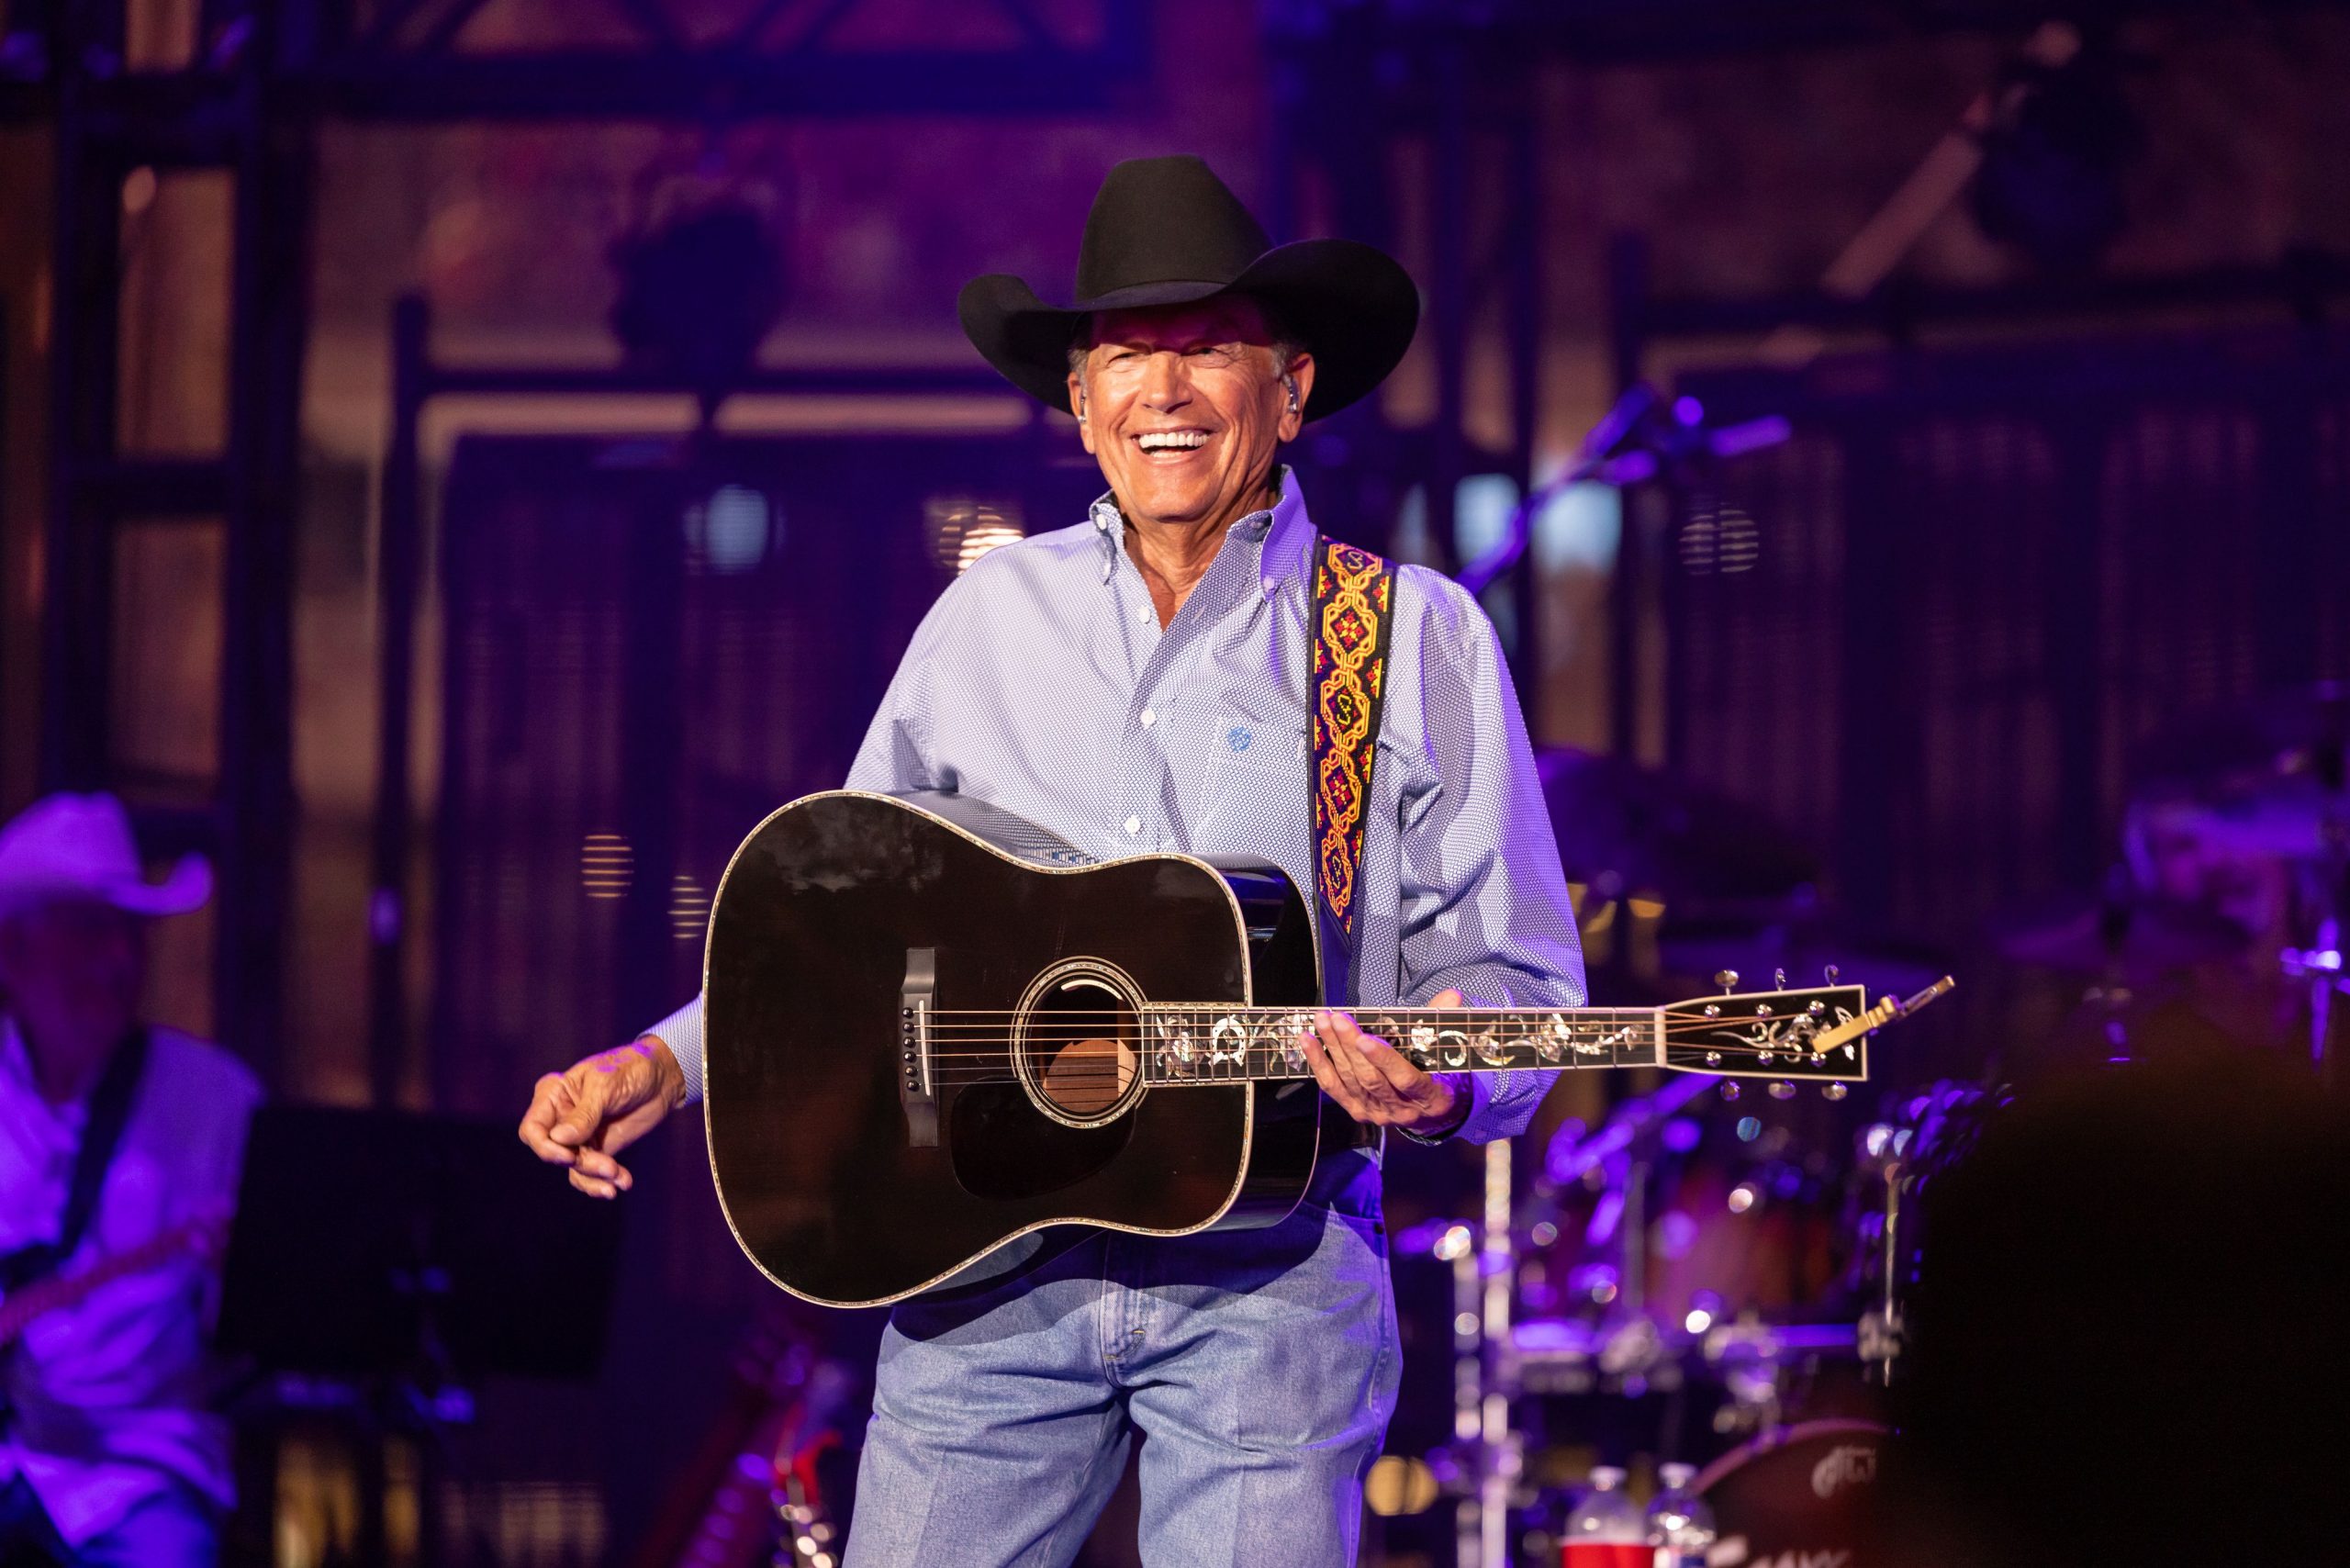 GEORGE STRAIT: THE KING AT KYLE FIELDBECOMES LARGEST SINGLE CONCERT IN U.S. HISTORY w/ 110,905